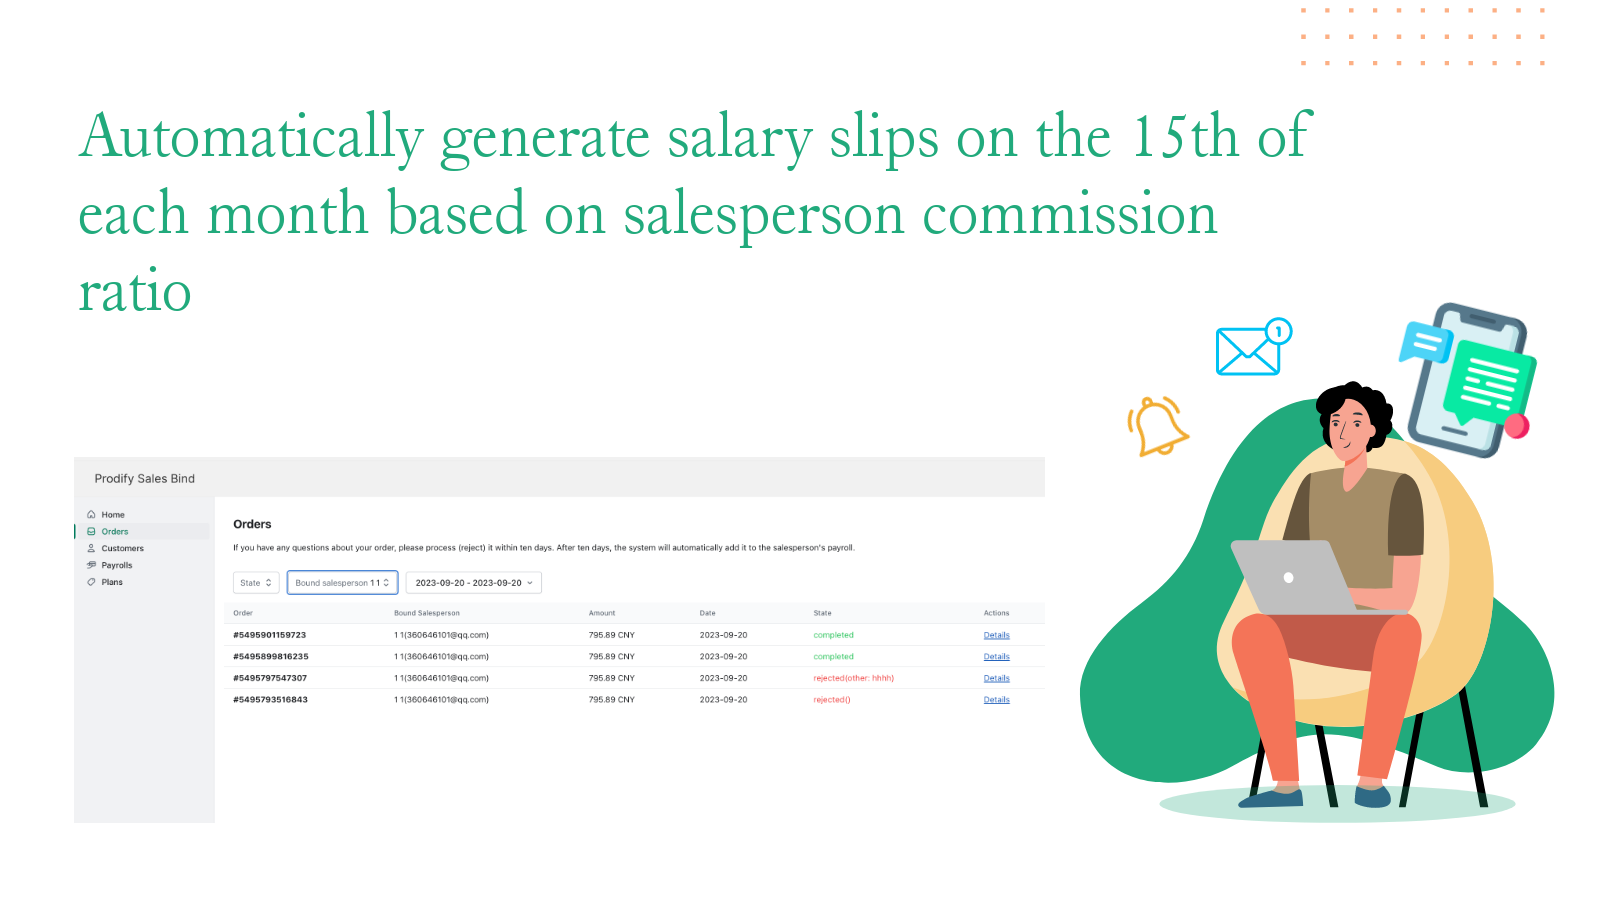 Automatically generate payroll based on commission ratio